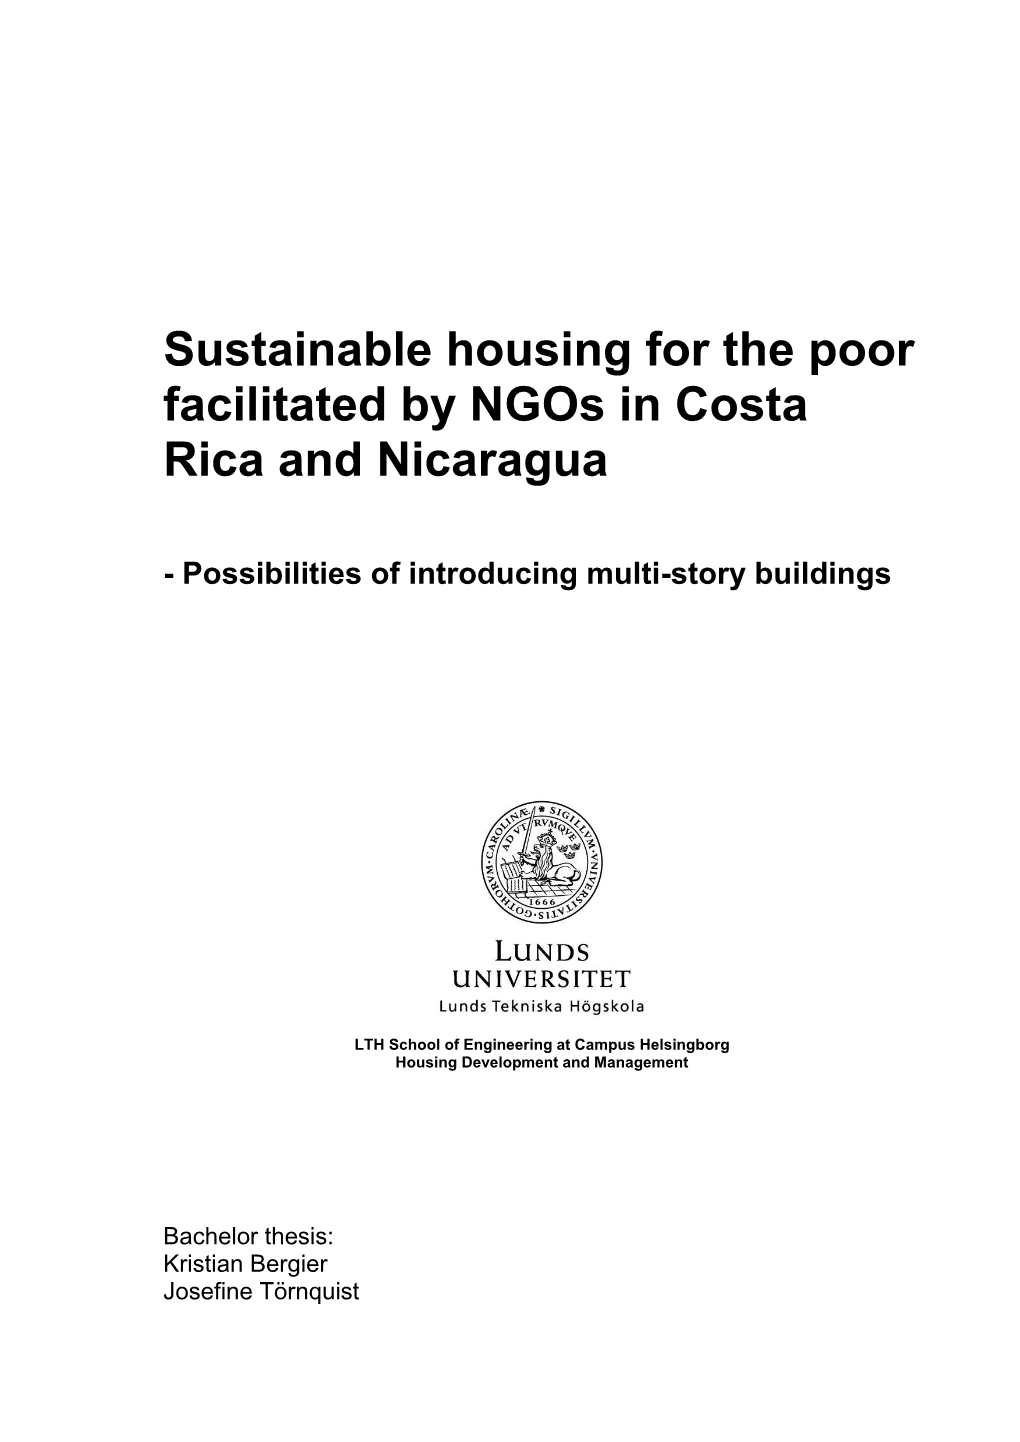 Sustainable Housing for the Poor Facilitated by Ngos in Costa Rica and Nicaragua